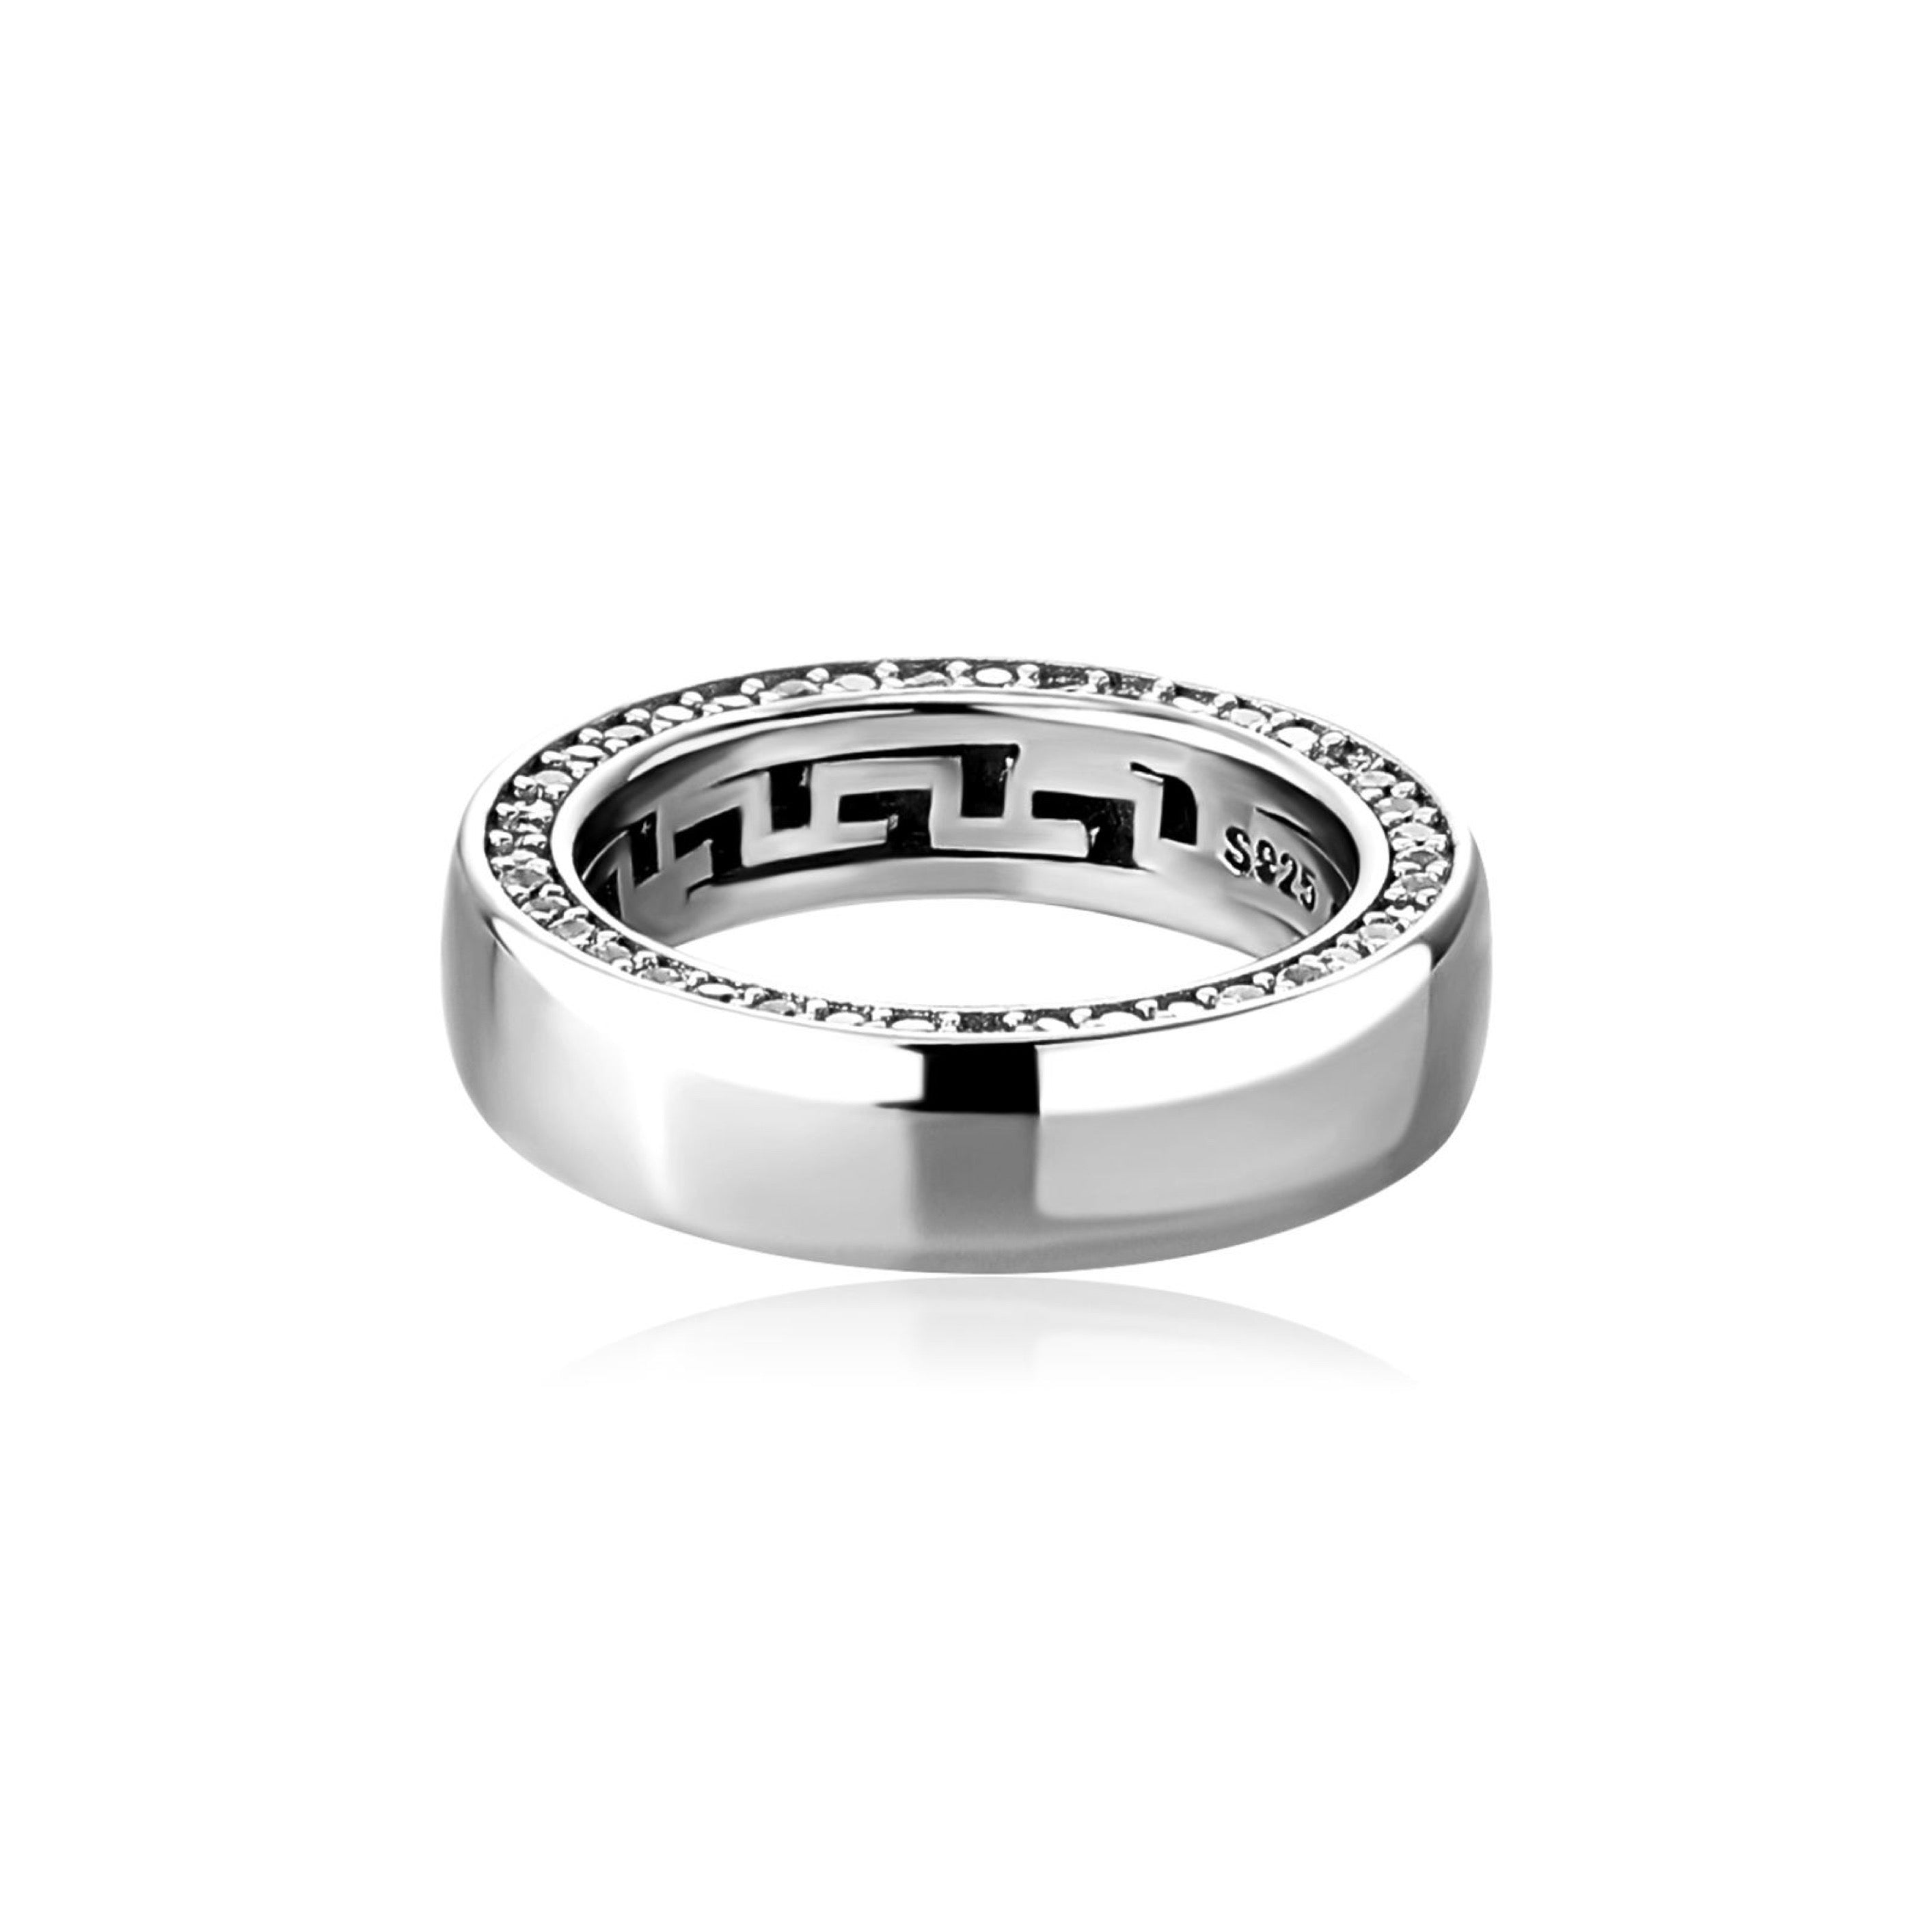 Sterling Silver Premium Julius Ring with Rhodium Plating from Glazd Jewels